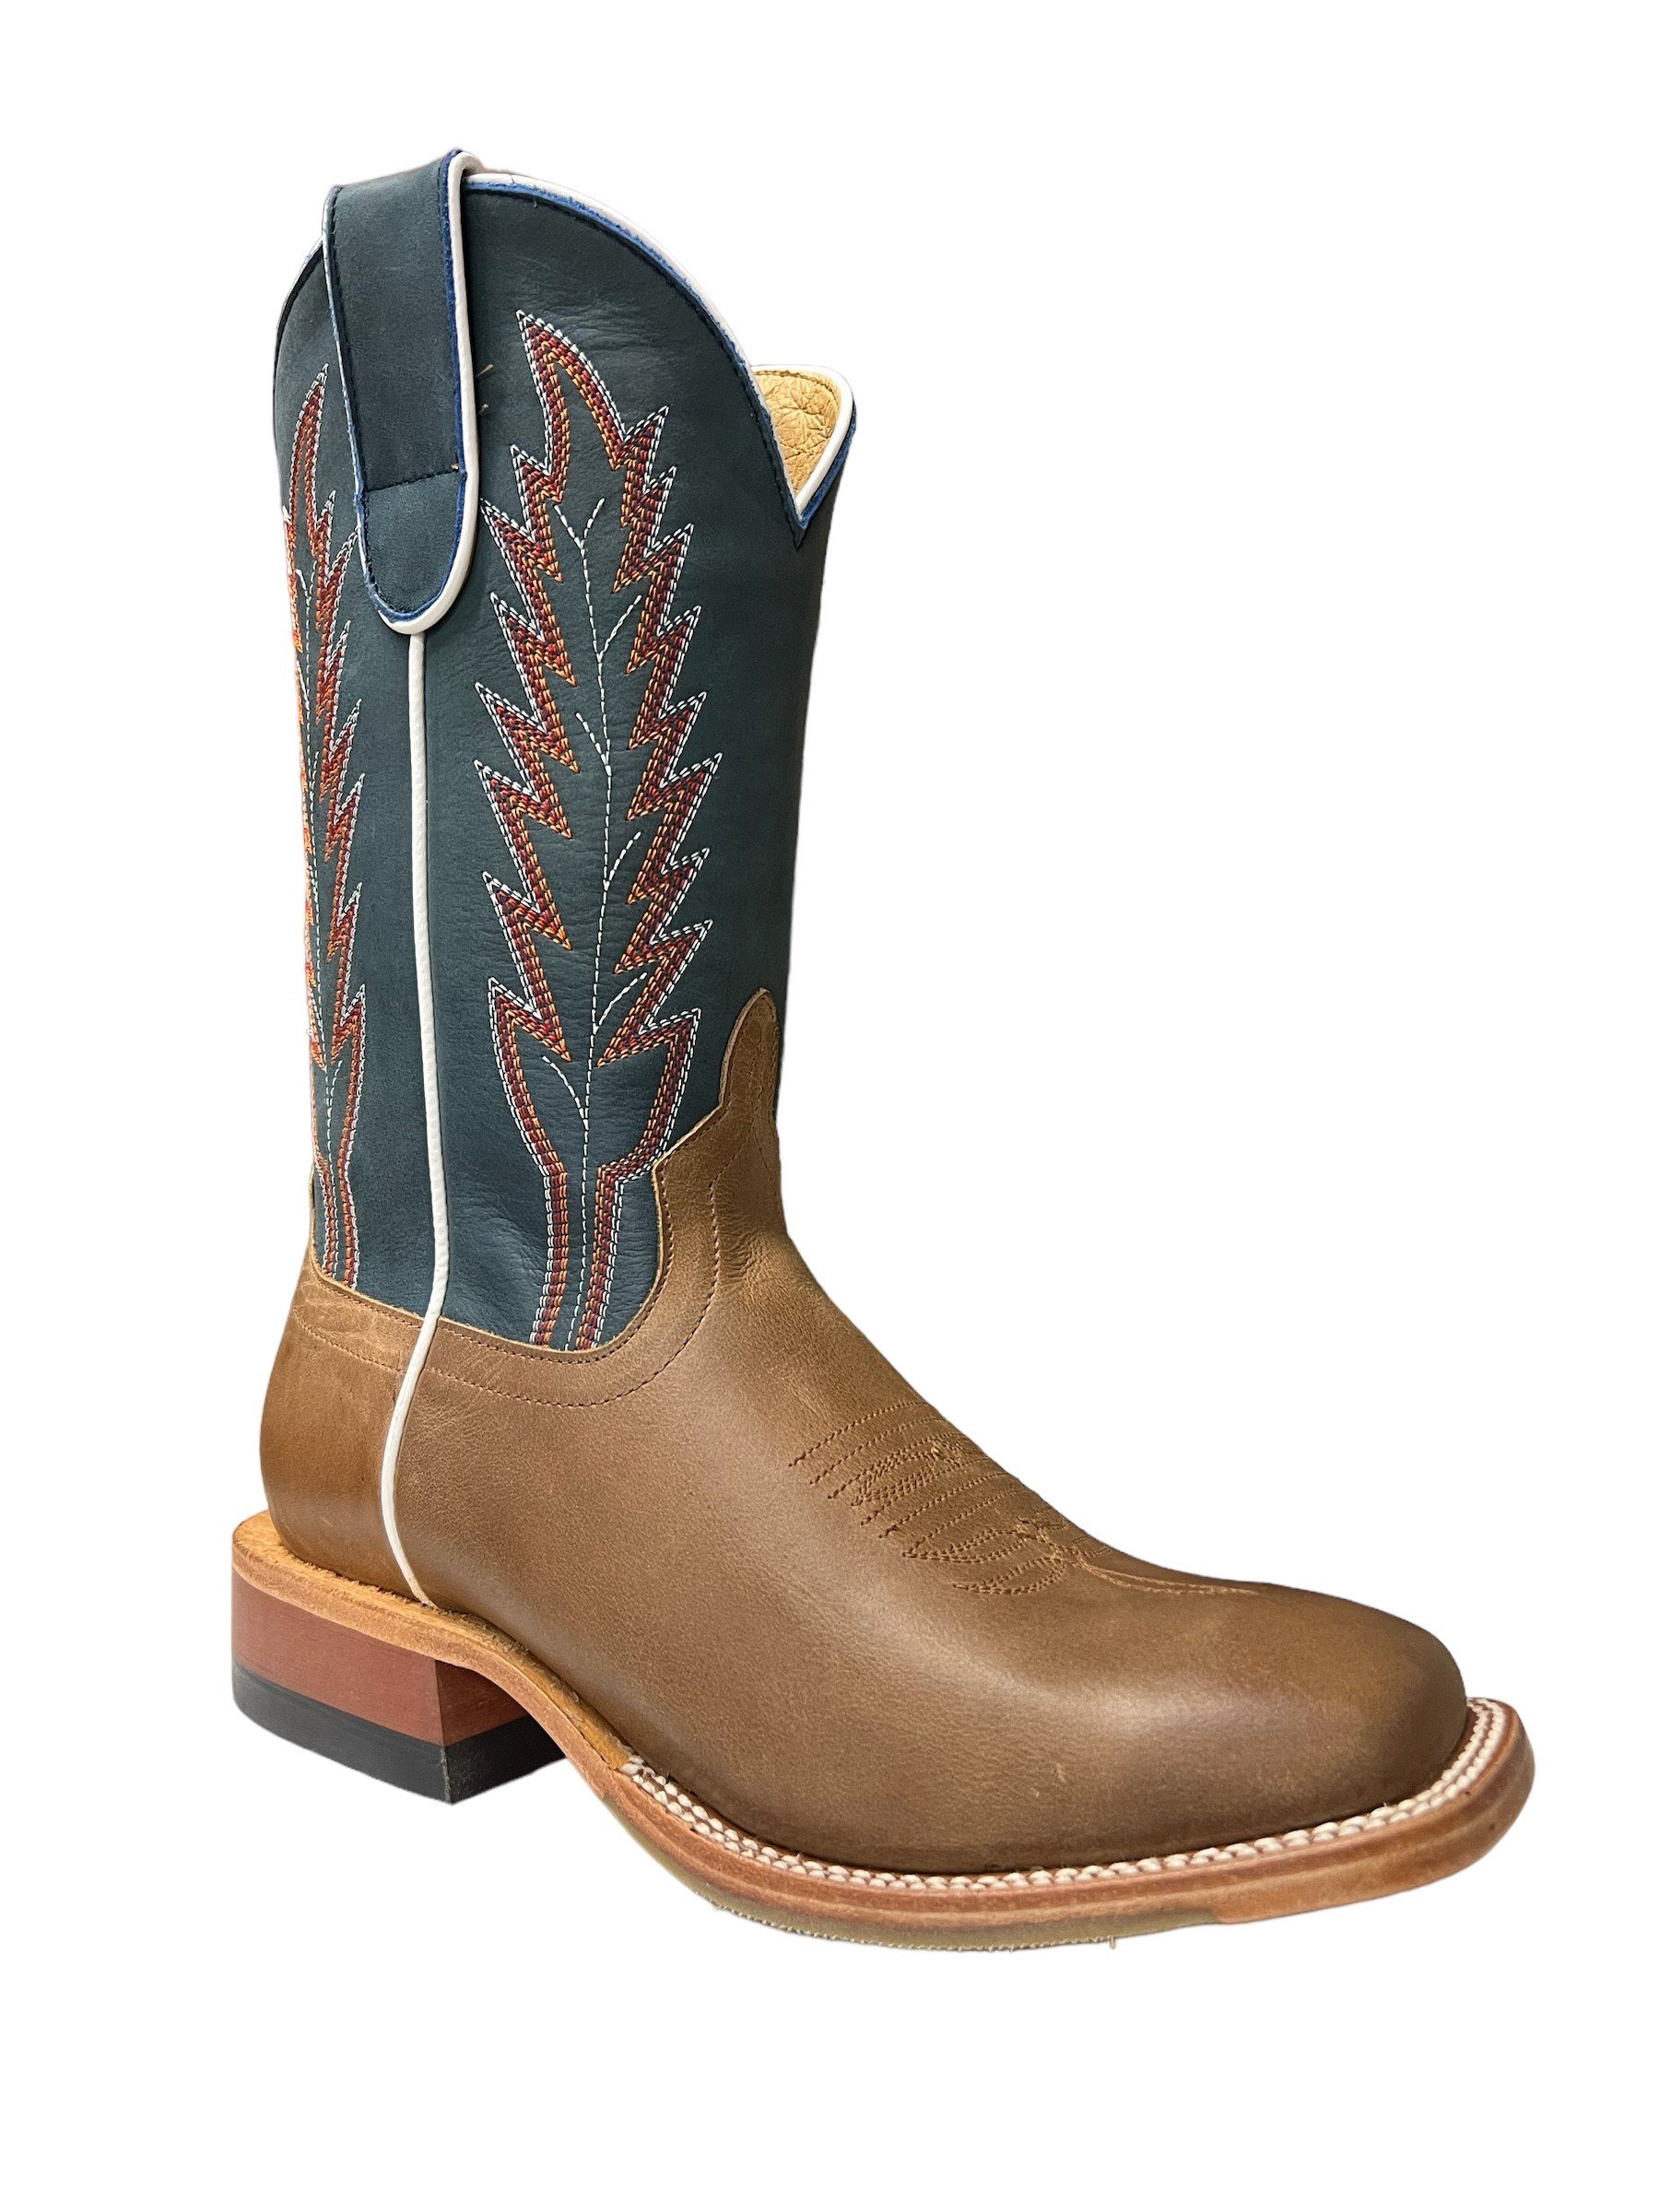 Women's Macie Bean A Square Deal Western Boots Was $219.95